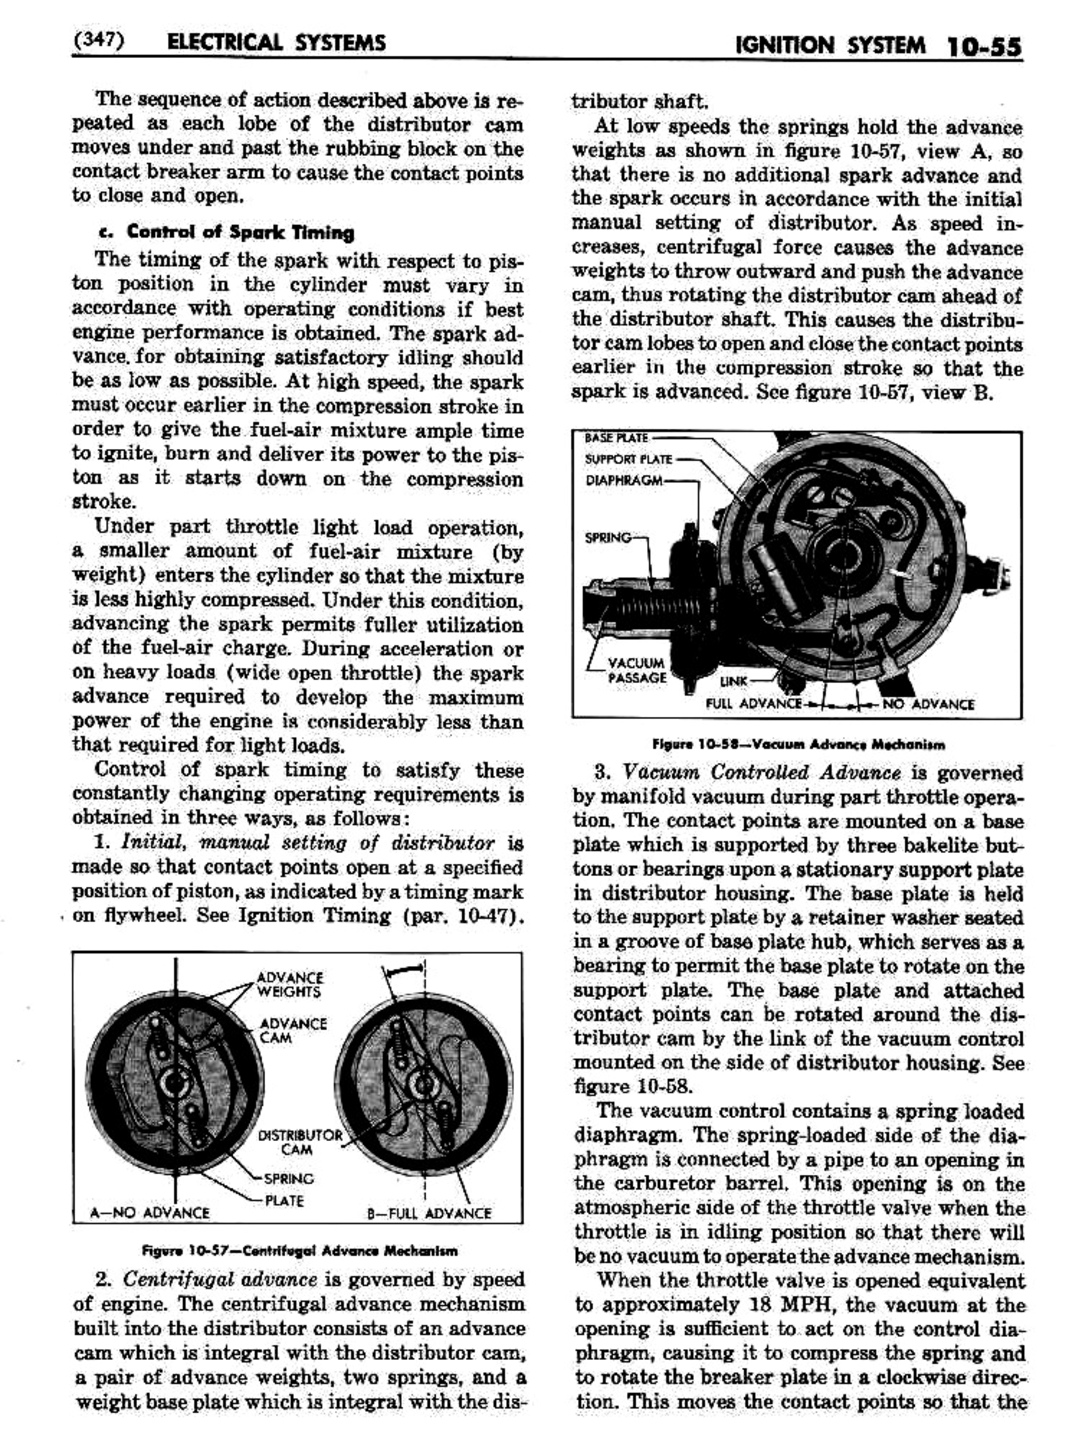 n_11 1951 Buick Shop Manual - Electrical Systems-055-055.jpg